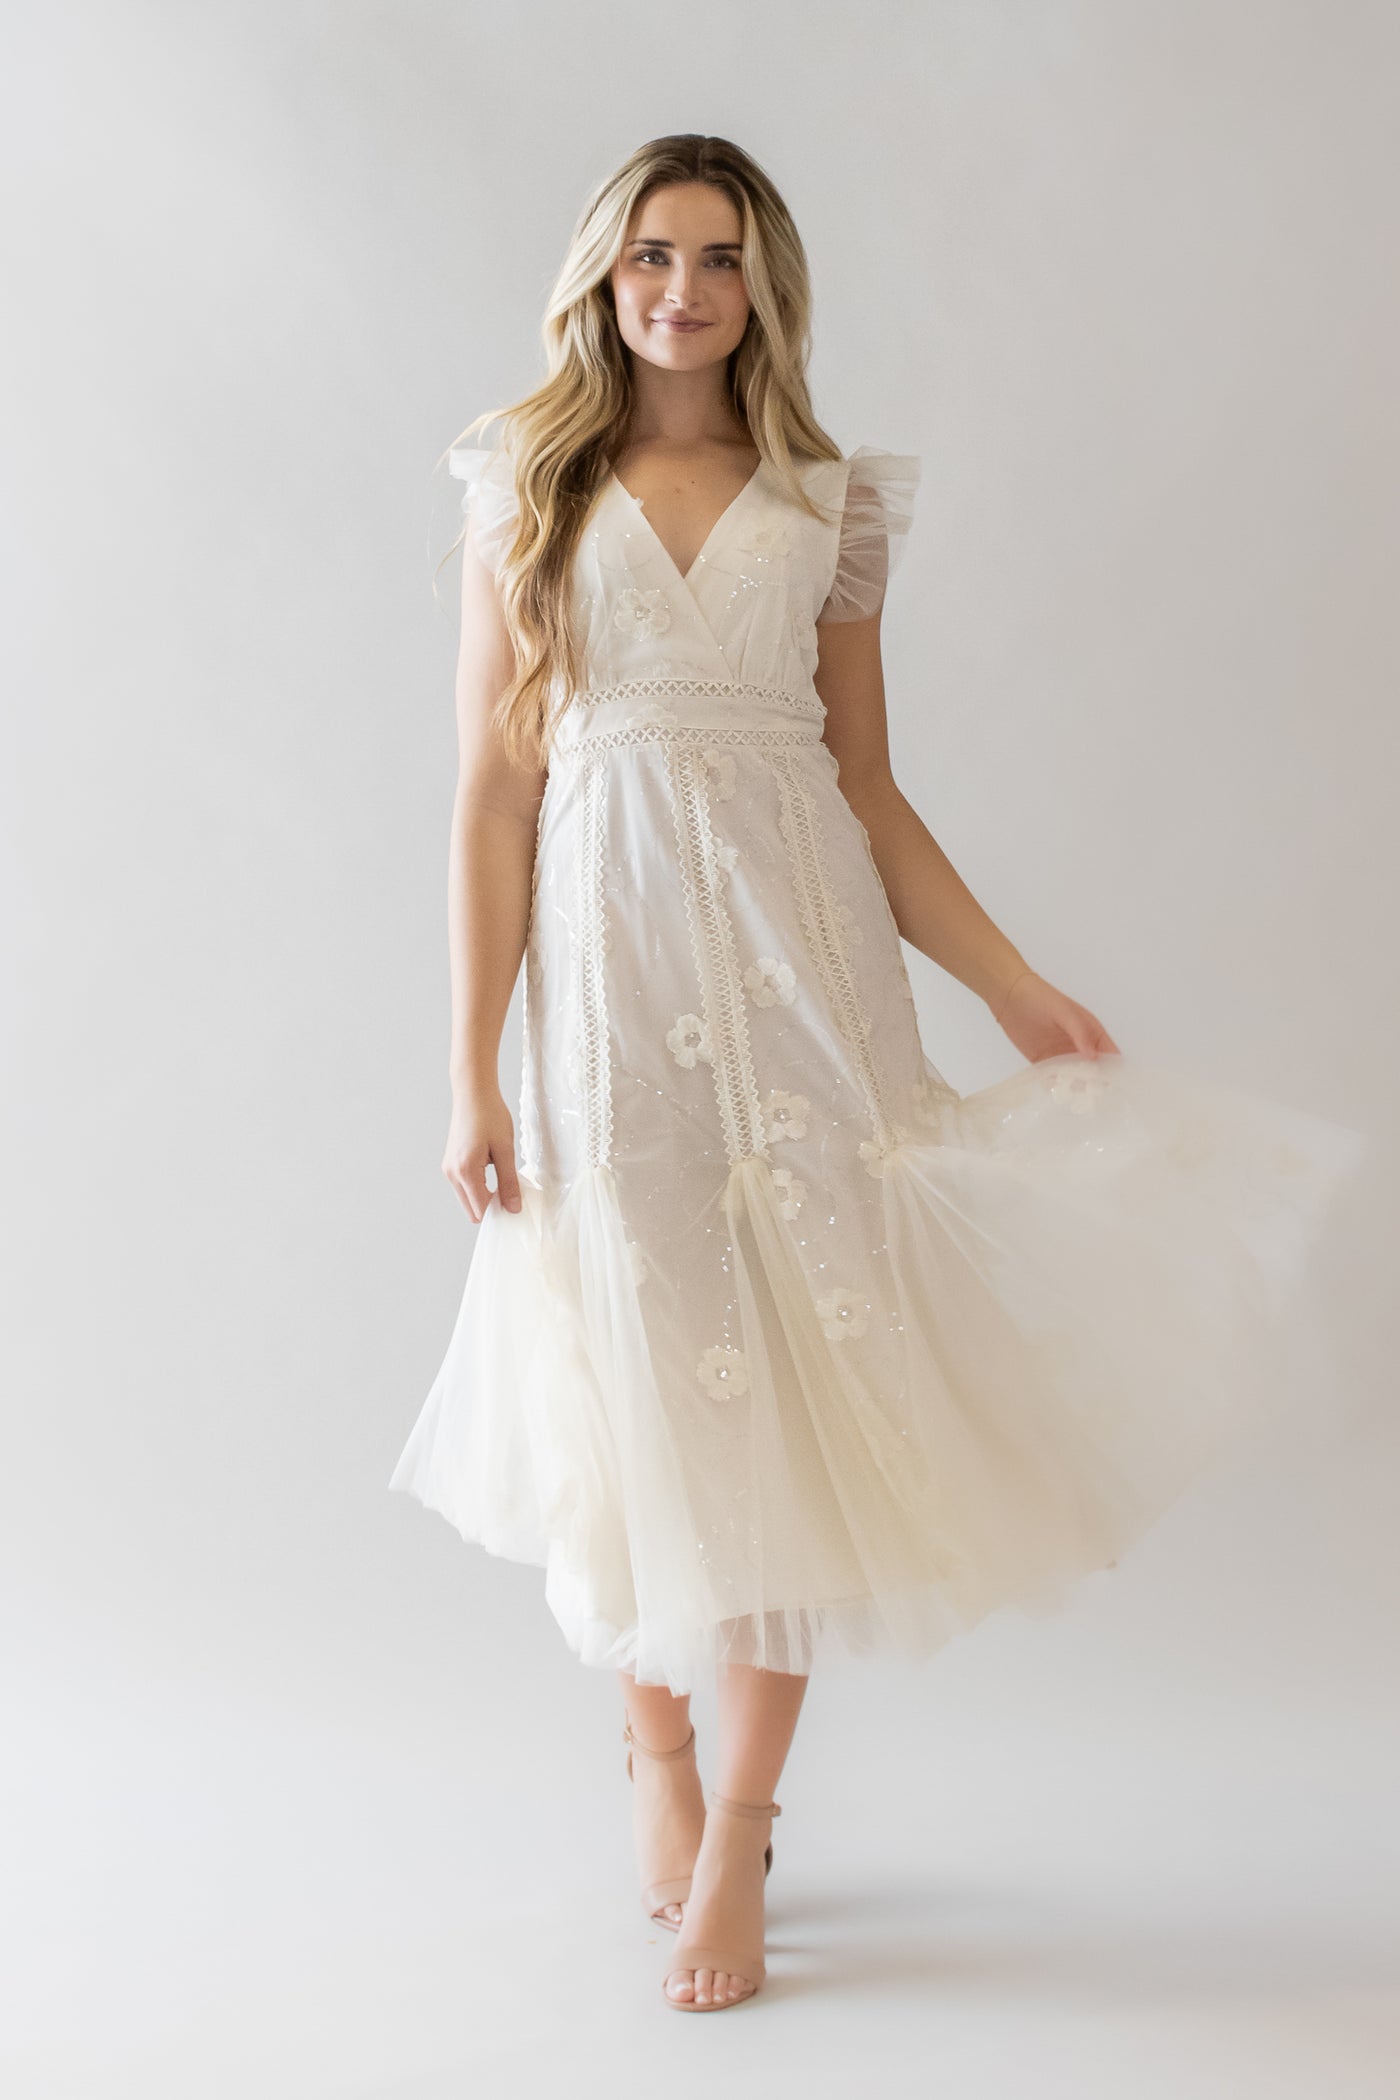 This is a model wearing a white modest dress with a v-neckline and tulle details with a subtle mermaid fit.